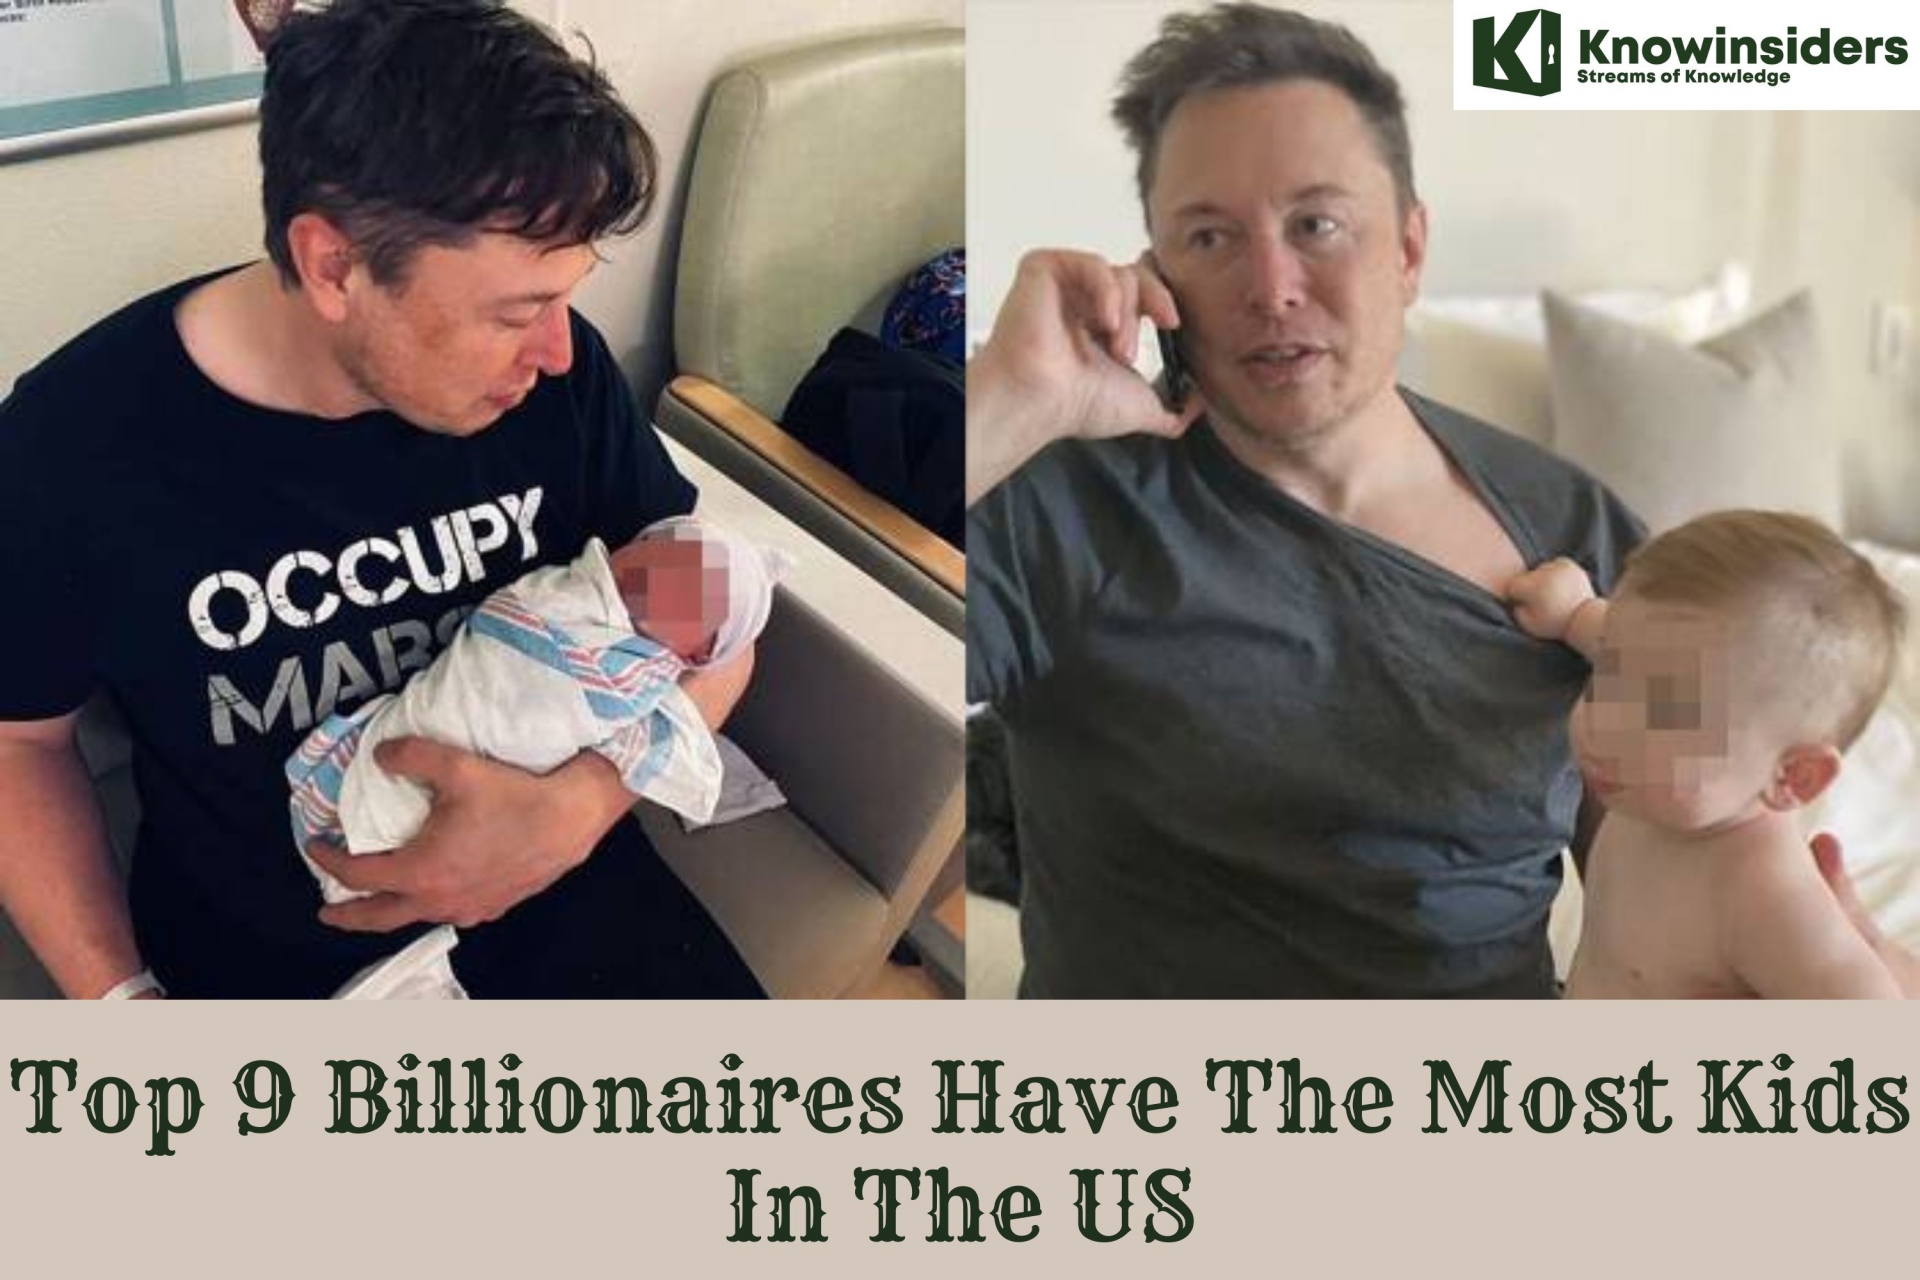 Top 9 Billionaires Have The Most Kids In The US